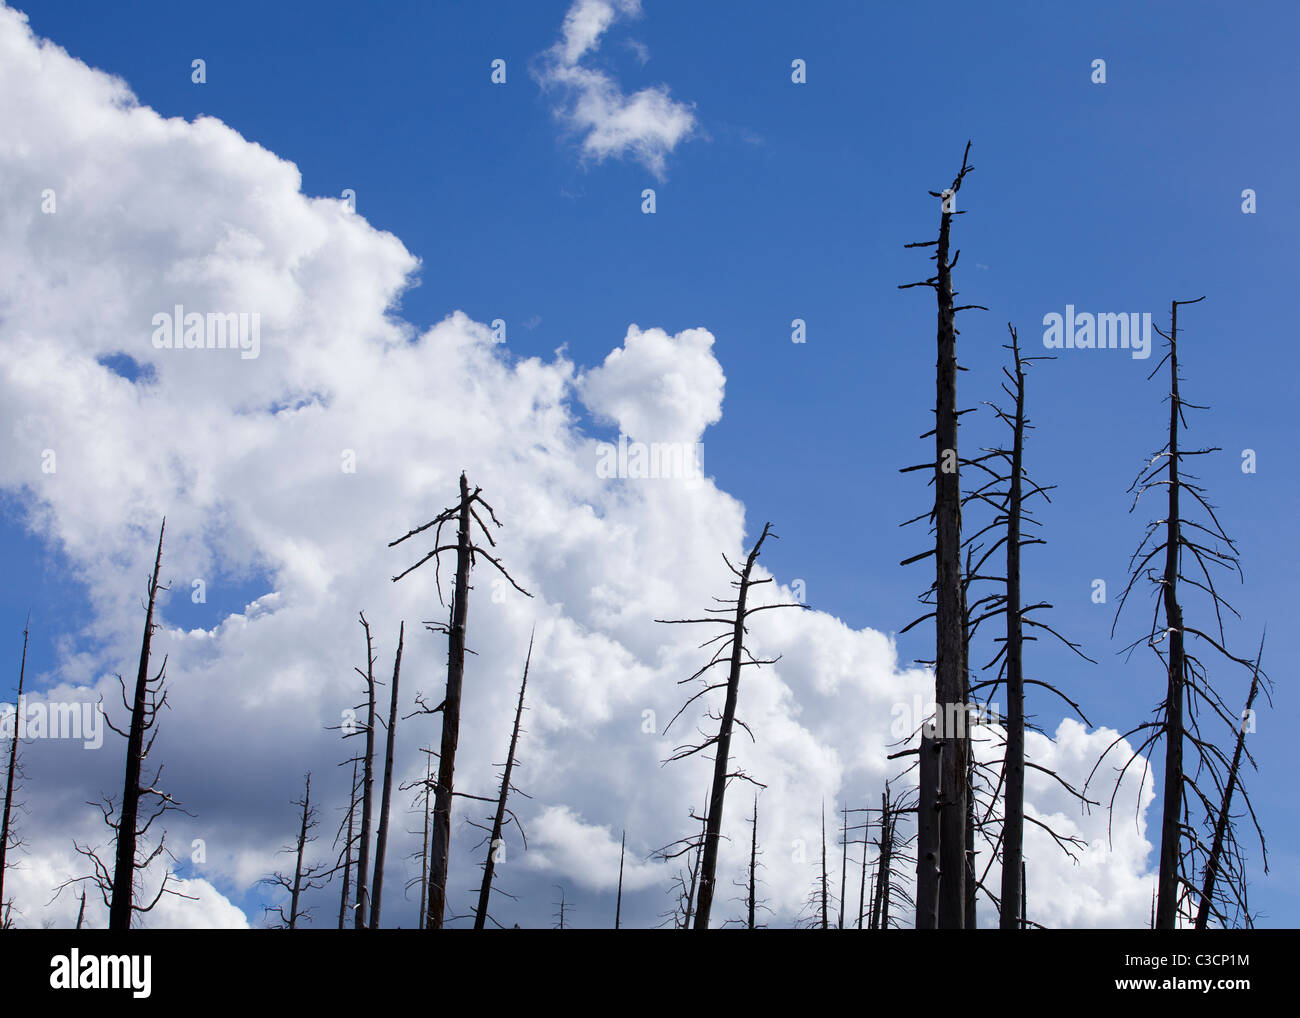 Trees burned in forest fire, against blue cloudy sky - Sierra Nevada mountains, California USA Stock Photo